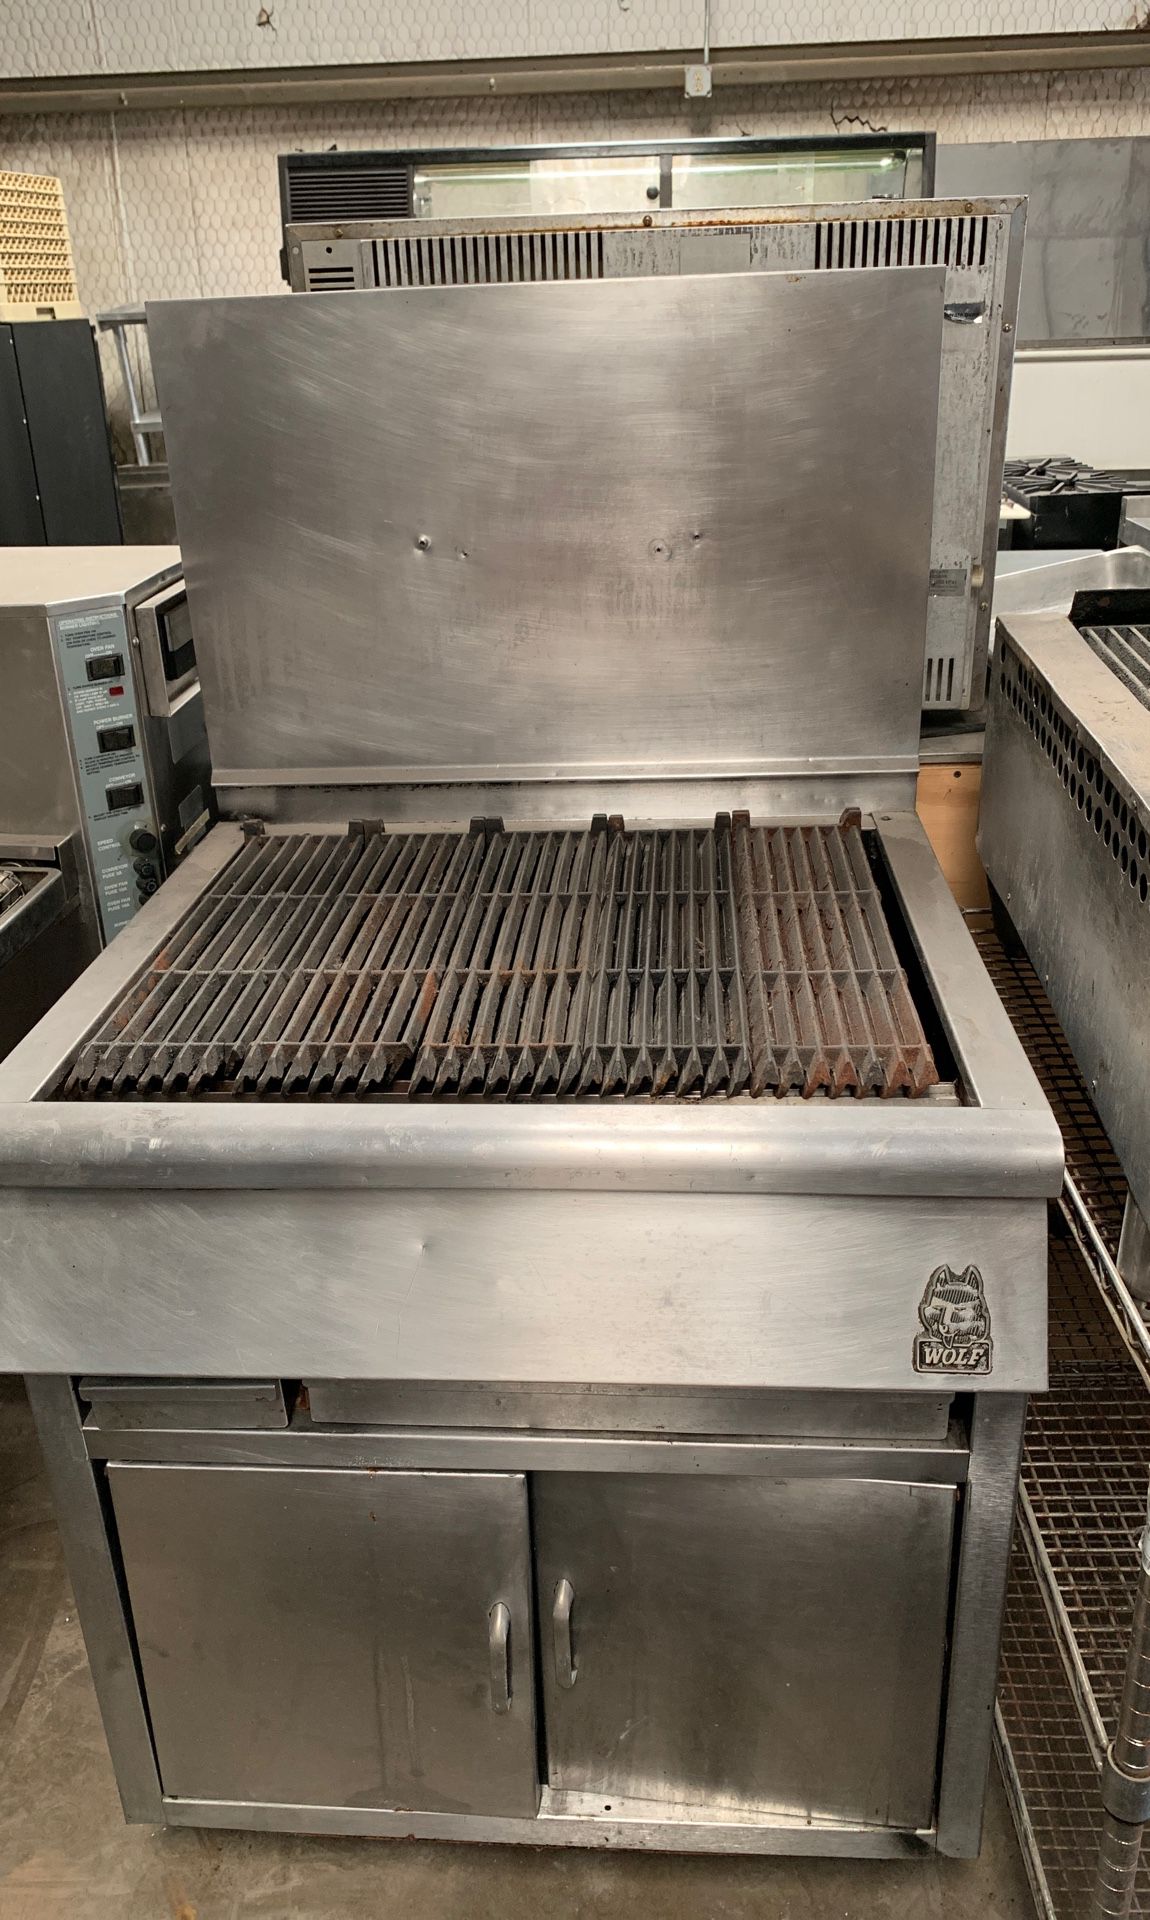 Commercial grill